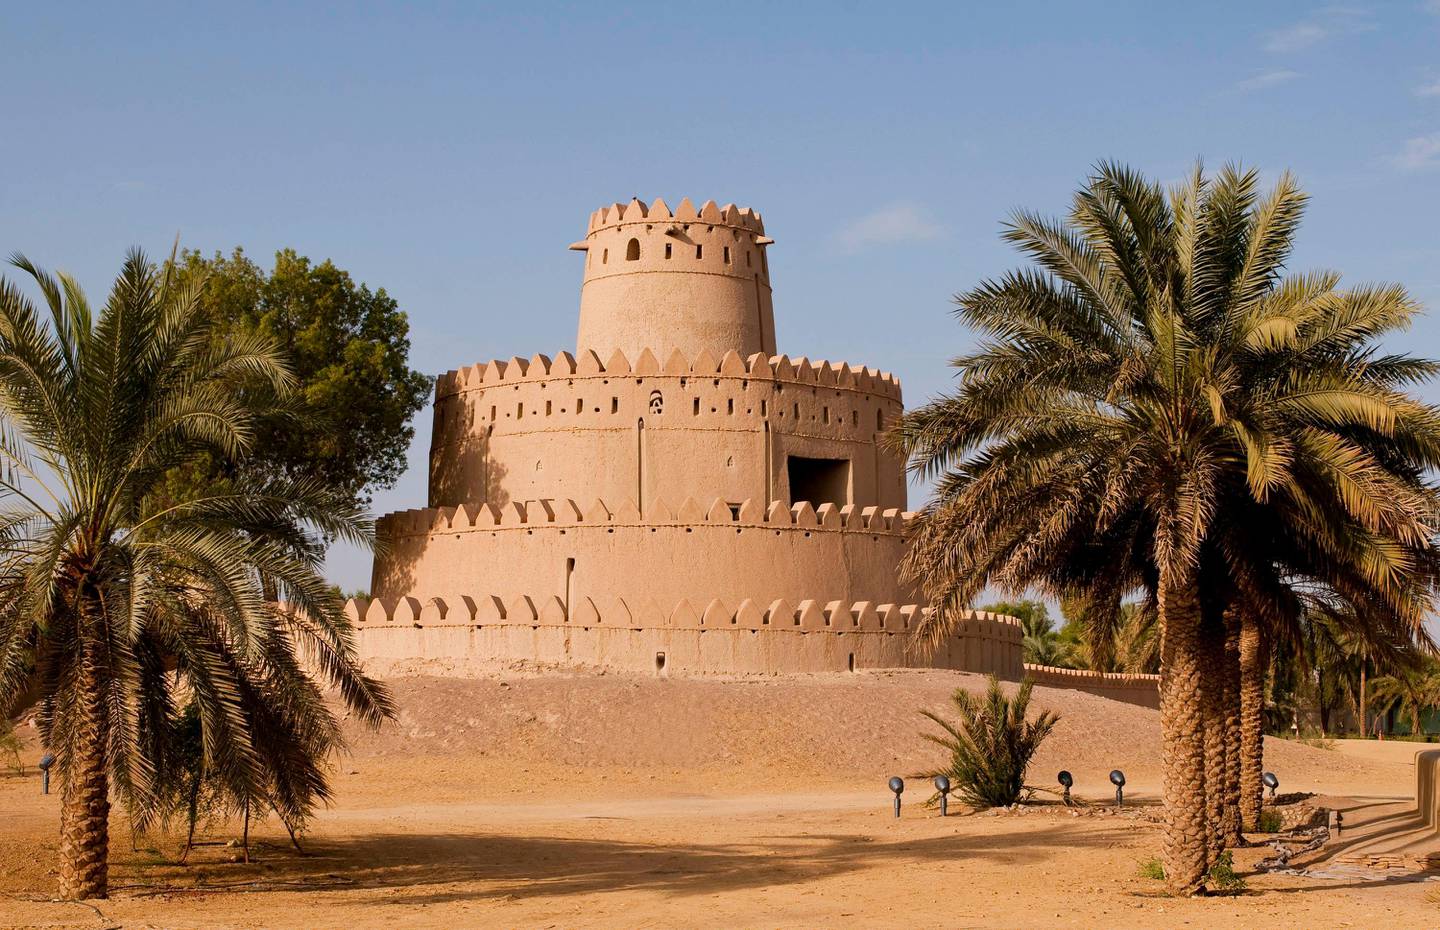 Al Jahli Fort in Al Ain, United Arab Emirates on Thursday, Aug. 12, 2010. Photo: Charles Crowell for The National